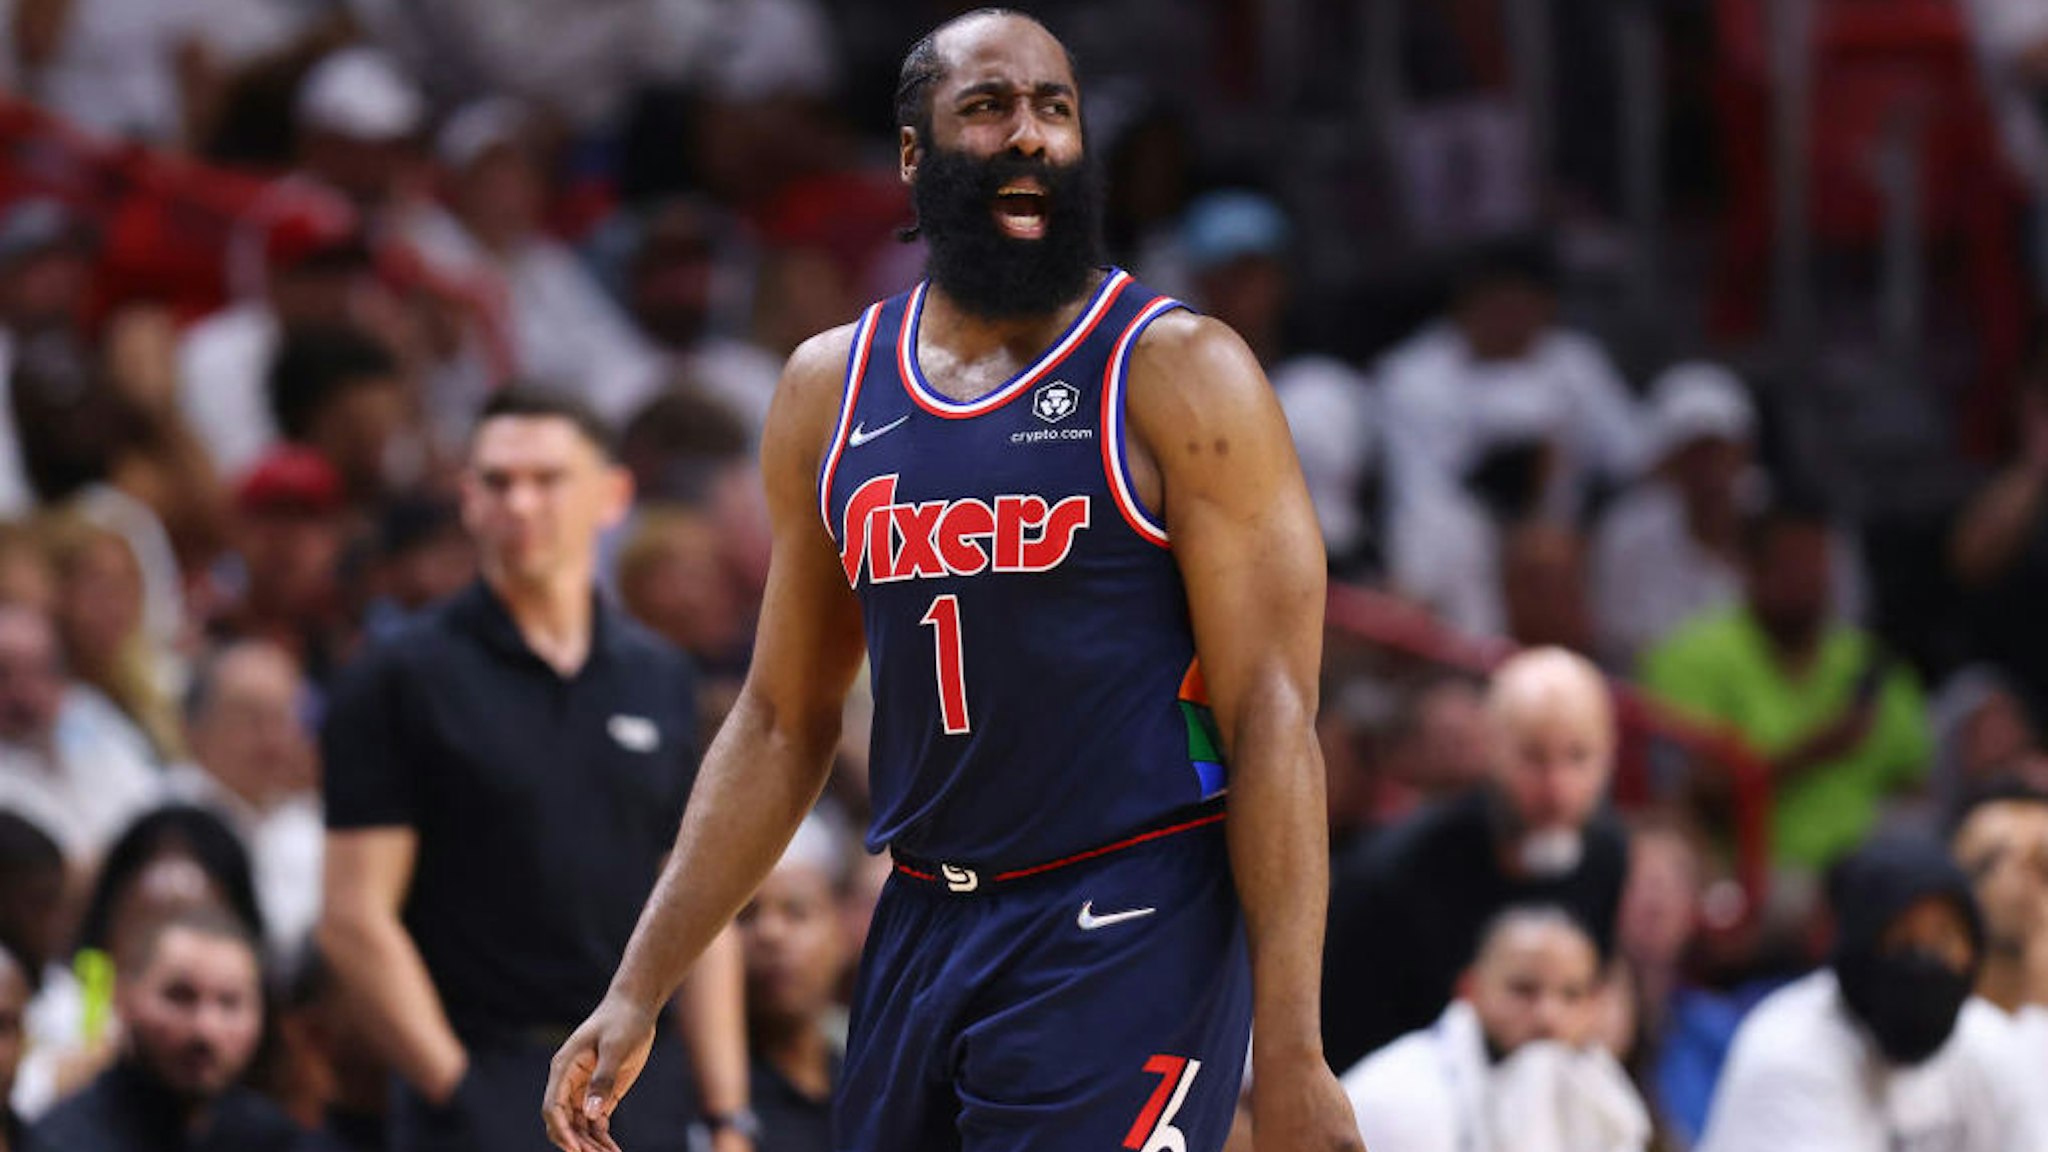 MIAMI, FLORIDA - MAY 02: James Harden #1 of the Philadelphia 76ers reacts against the Miami Heat during the first half in Game One of the Eastern Conference Semifinals at FTX Arena on May 02, 2022 in Miami, Florida. NOTE TO USER: User expressly acknowledges and agrees that, by downloading and or using this photograph, User is consenting to the terms and conditions of the Getty Images License Agreement. (Photo by Michael Reaves/Getty Images)